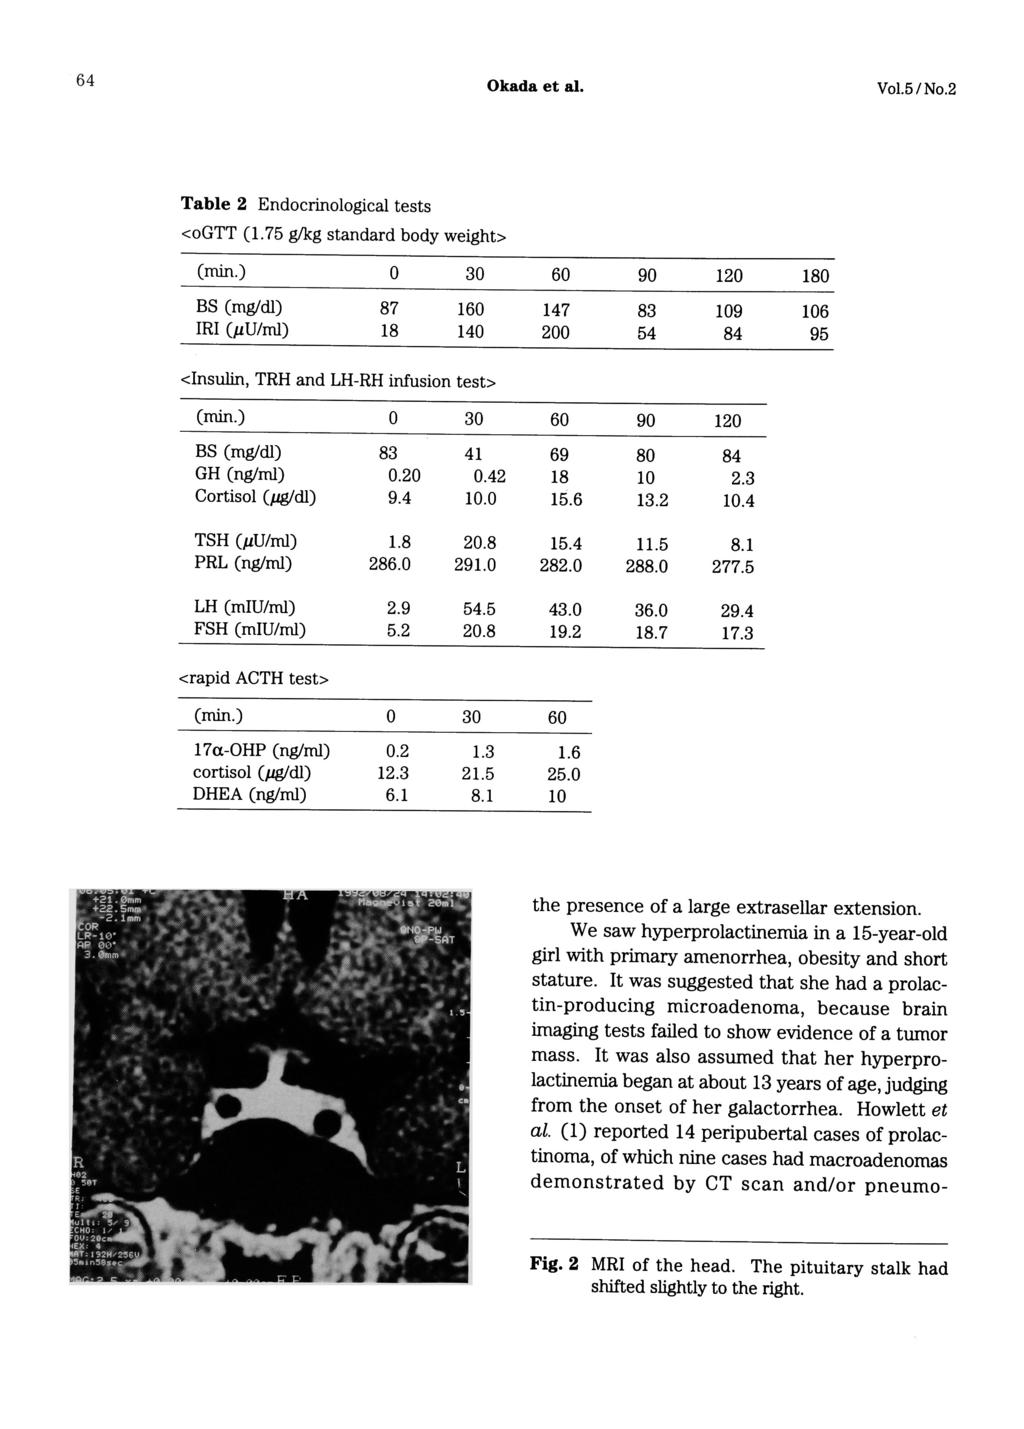 64 Okada Table 2 Endocrinological et al. Vol.5/No.2 tests the presence of a large extrasellar extension.